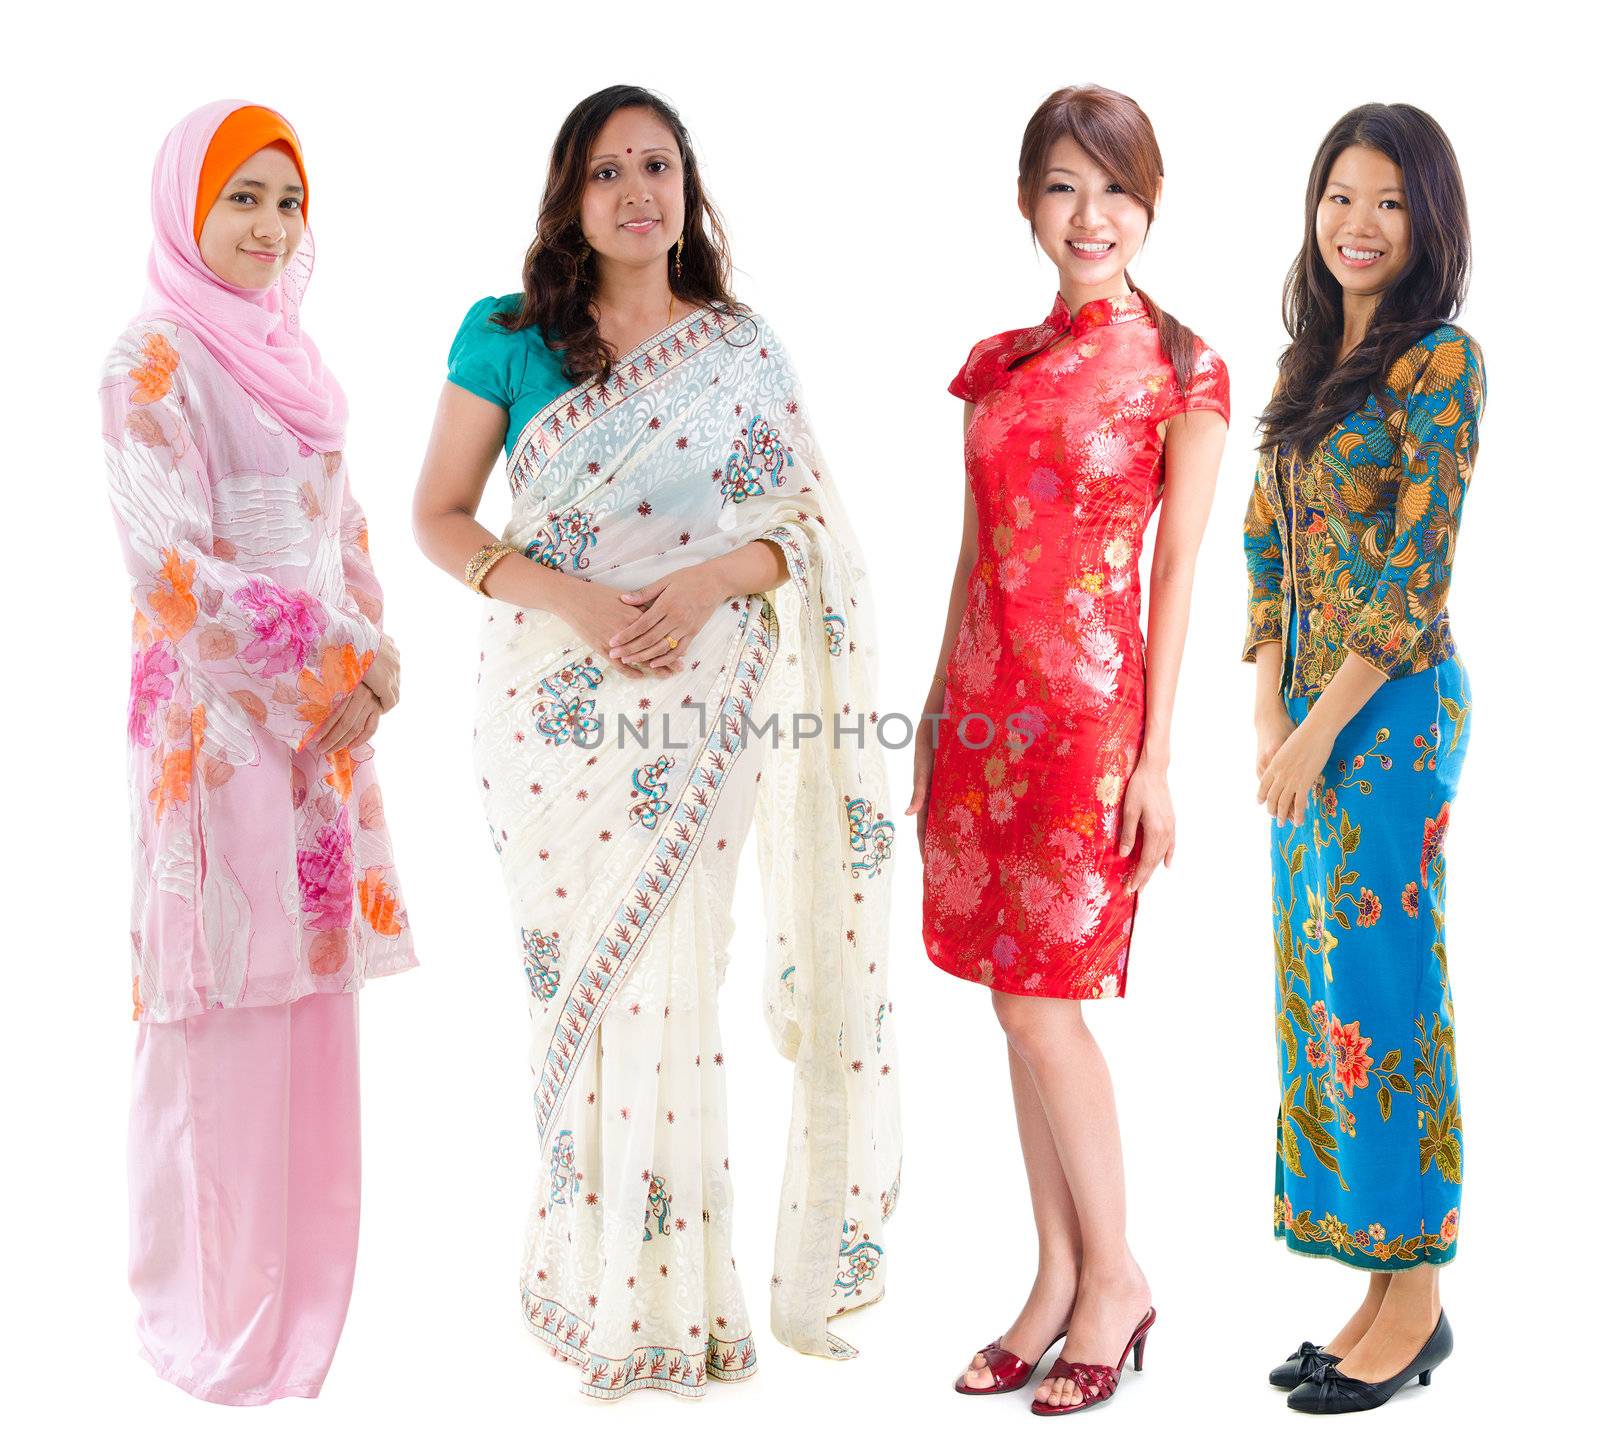 Group of Southeast Asian women in different culture. Full body diversity women in different traditional costume standing on white background.